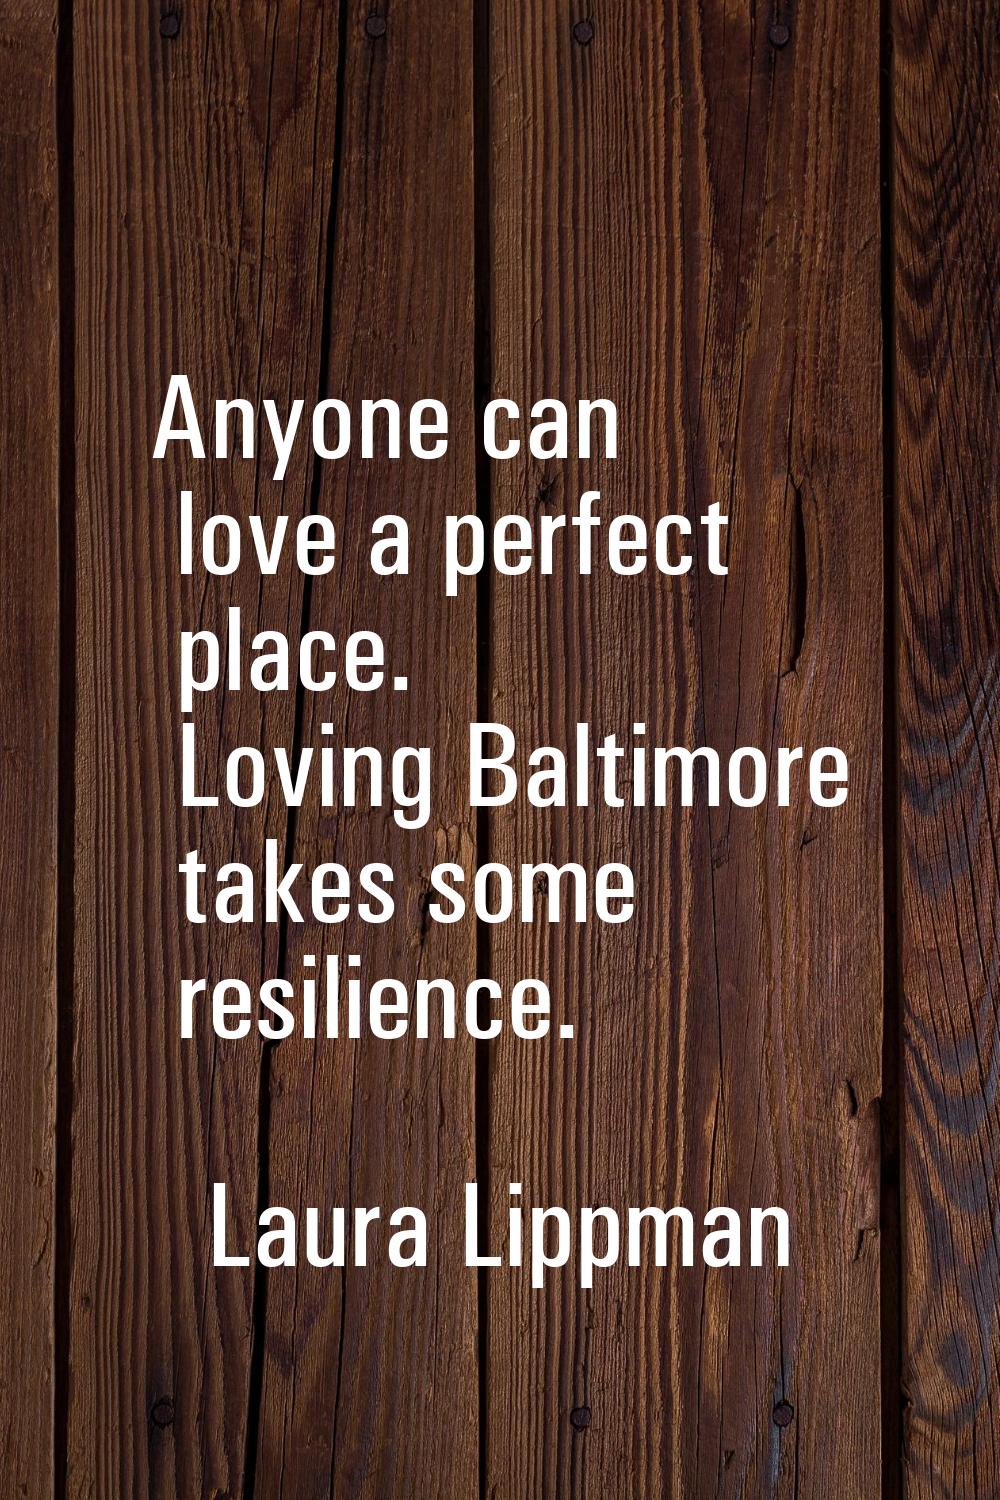 Anyone can love a perfect place. Loving Baltimore takes some resilience.